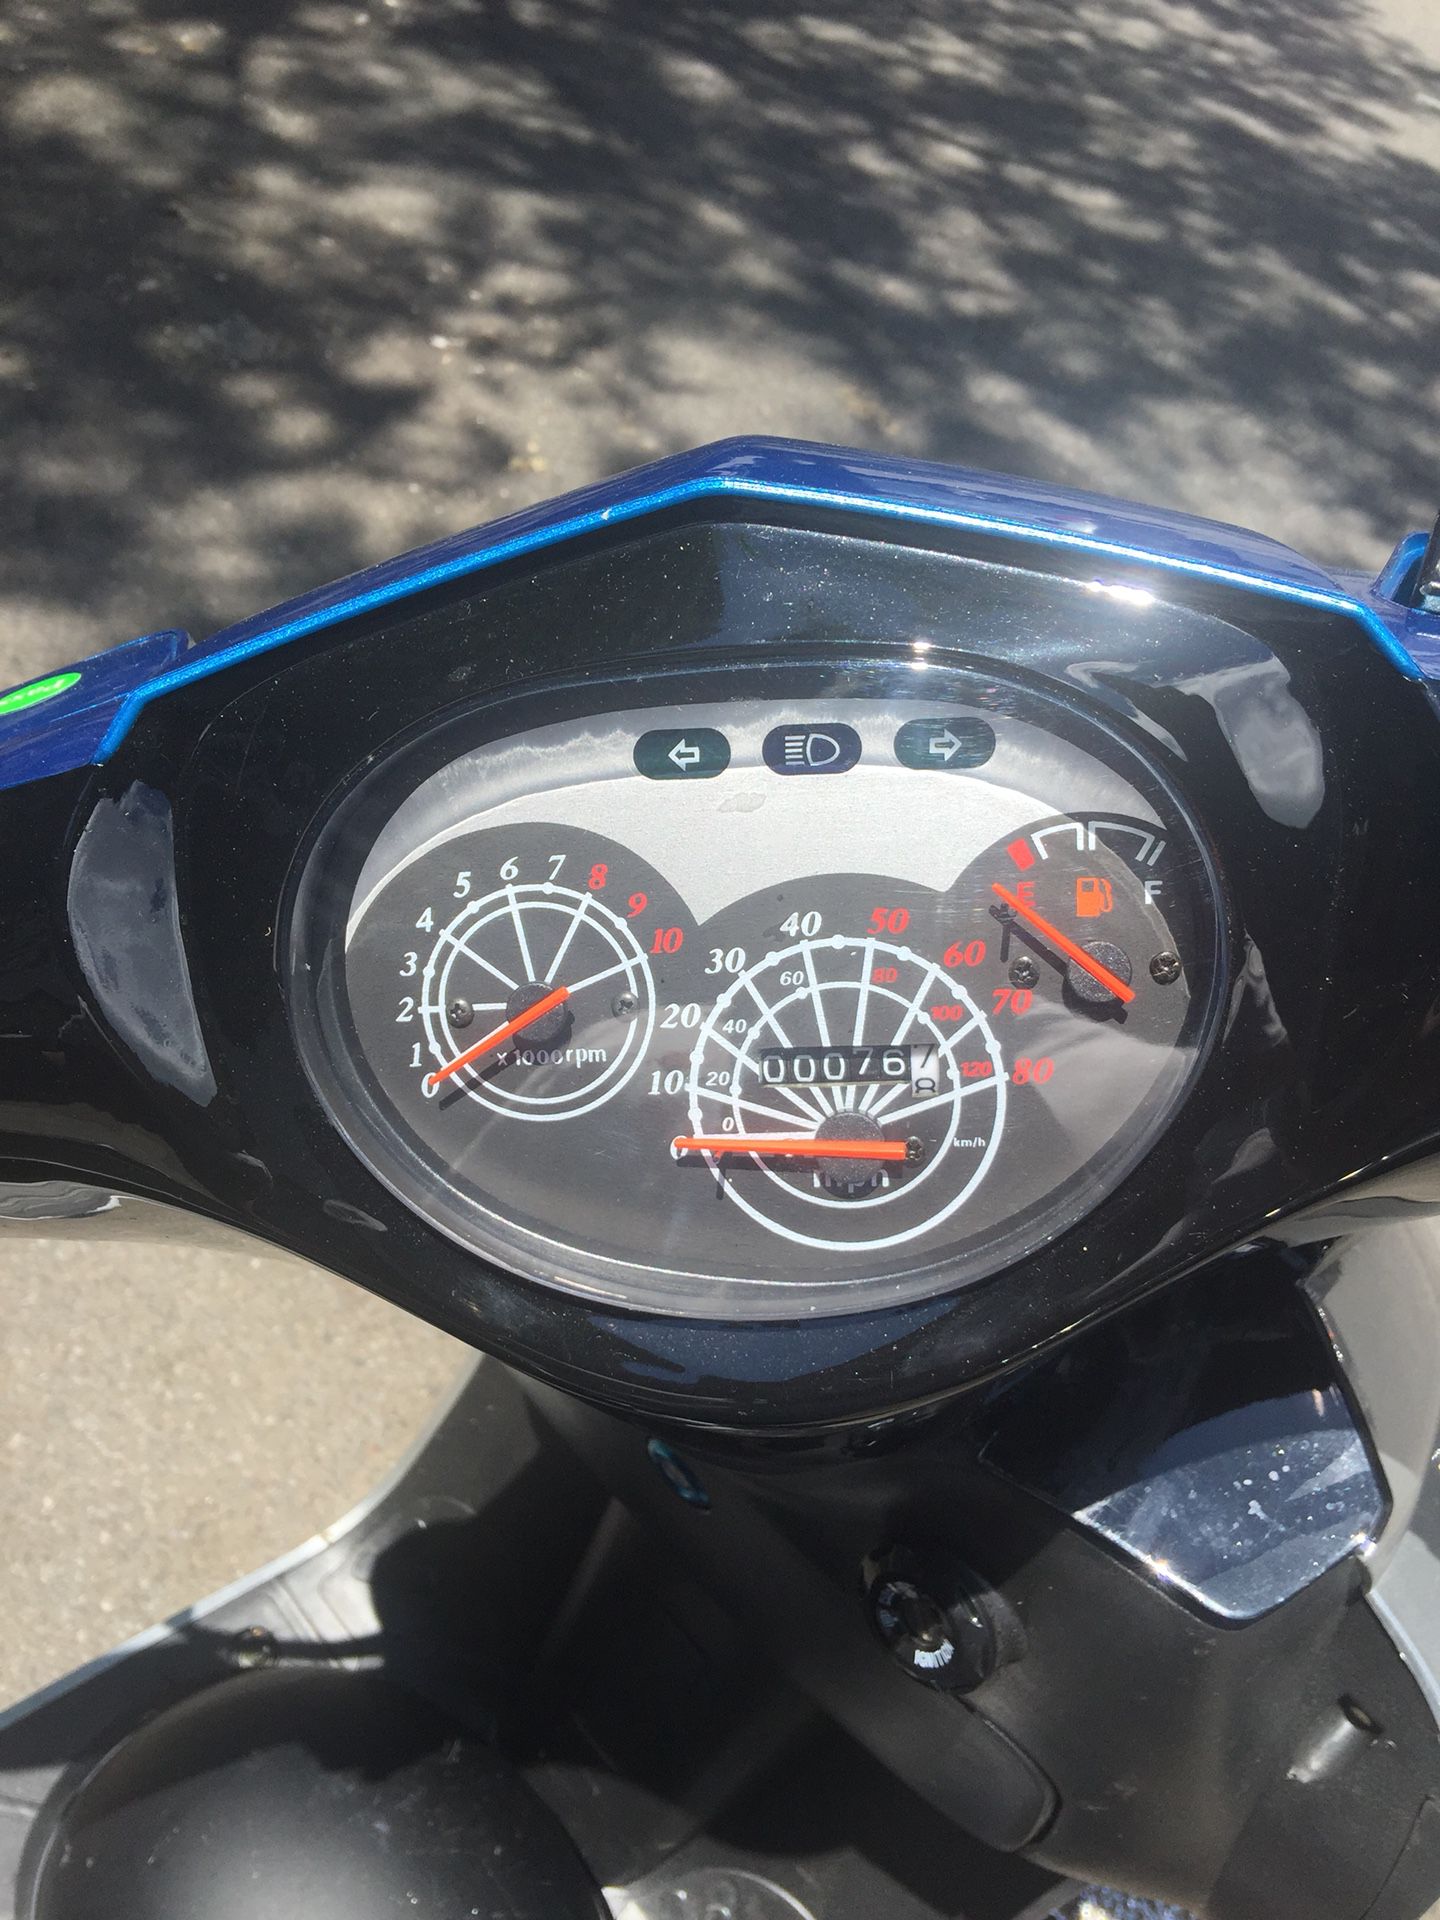 150cc scooter like new low miles